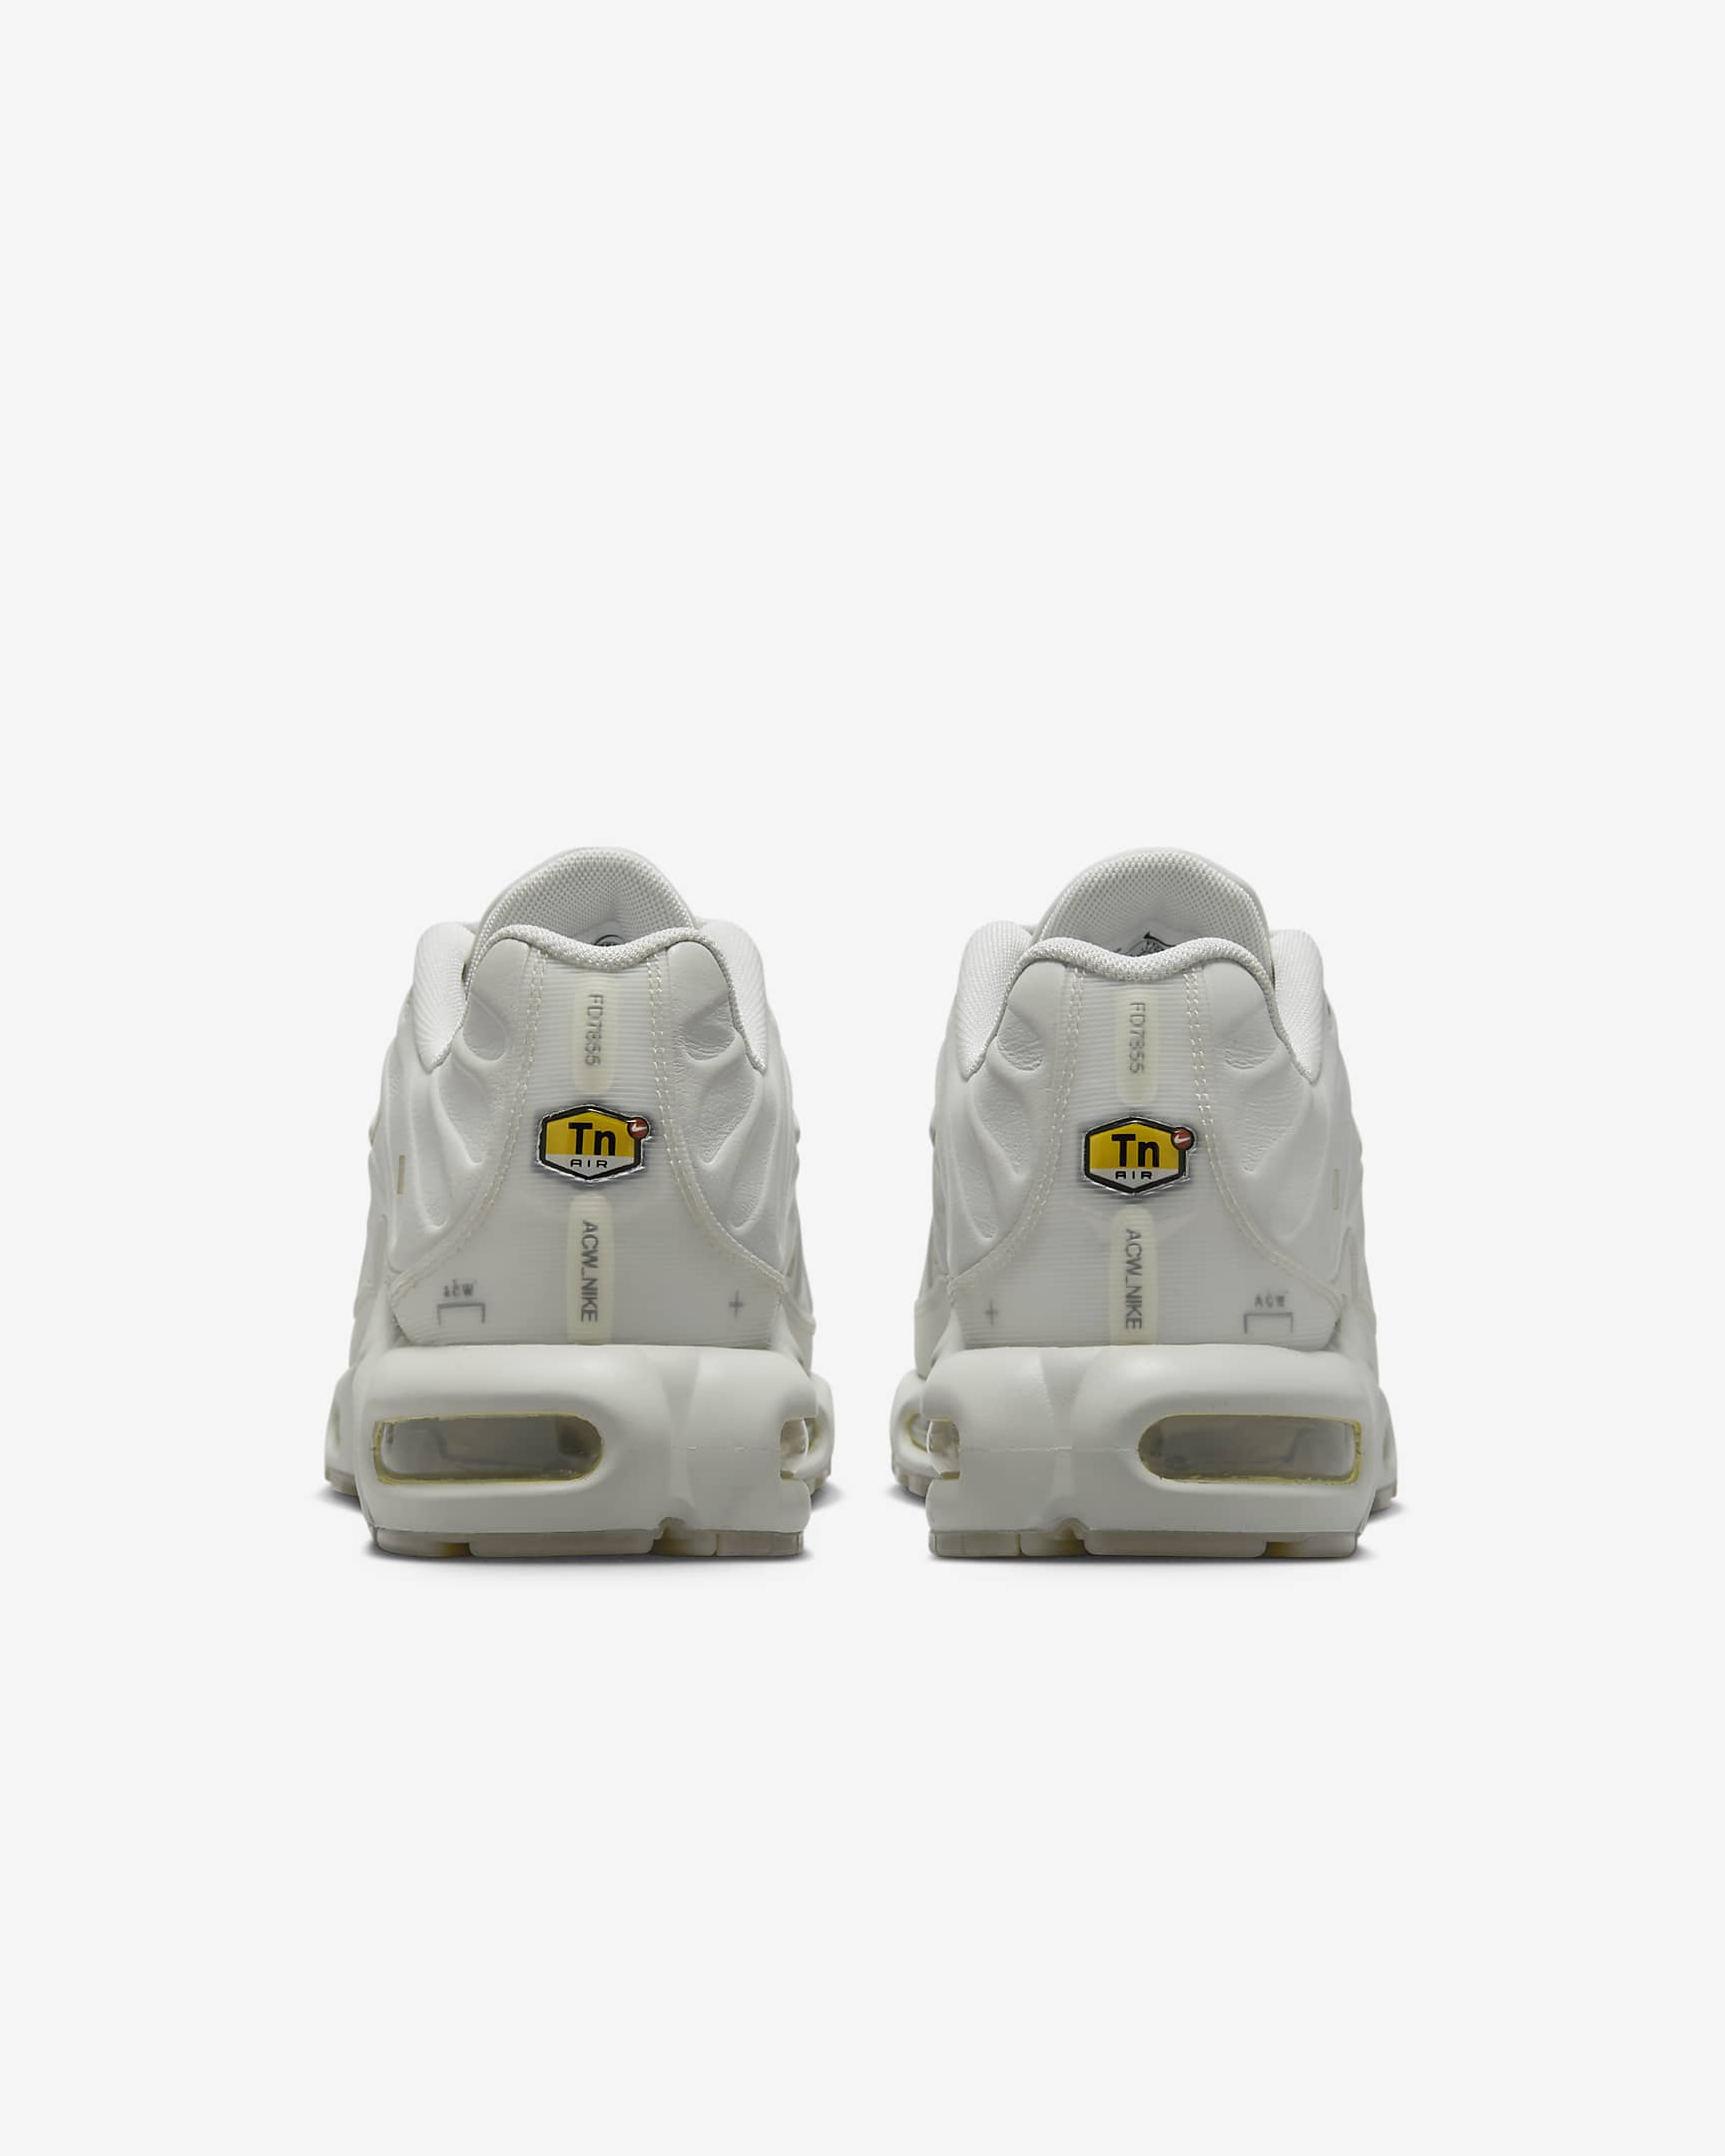 Nike Air Max Plus x A-COLD-WALL* Men's Shoes. Nike AT